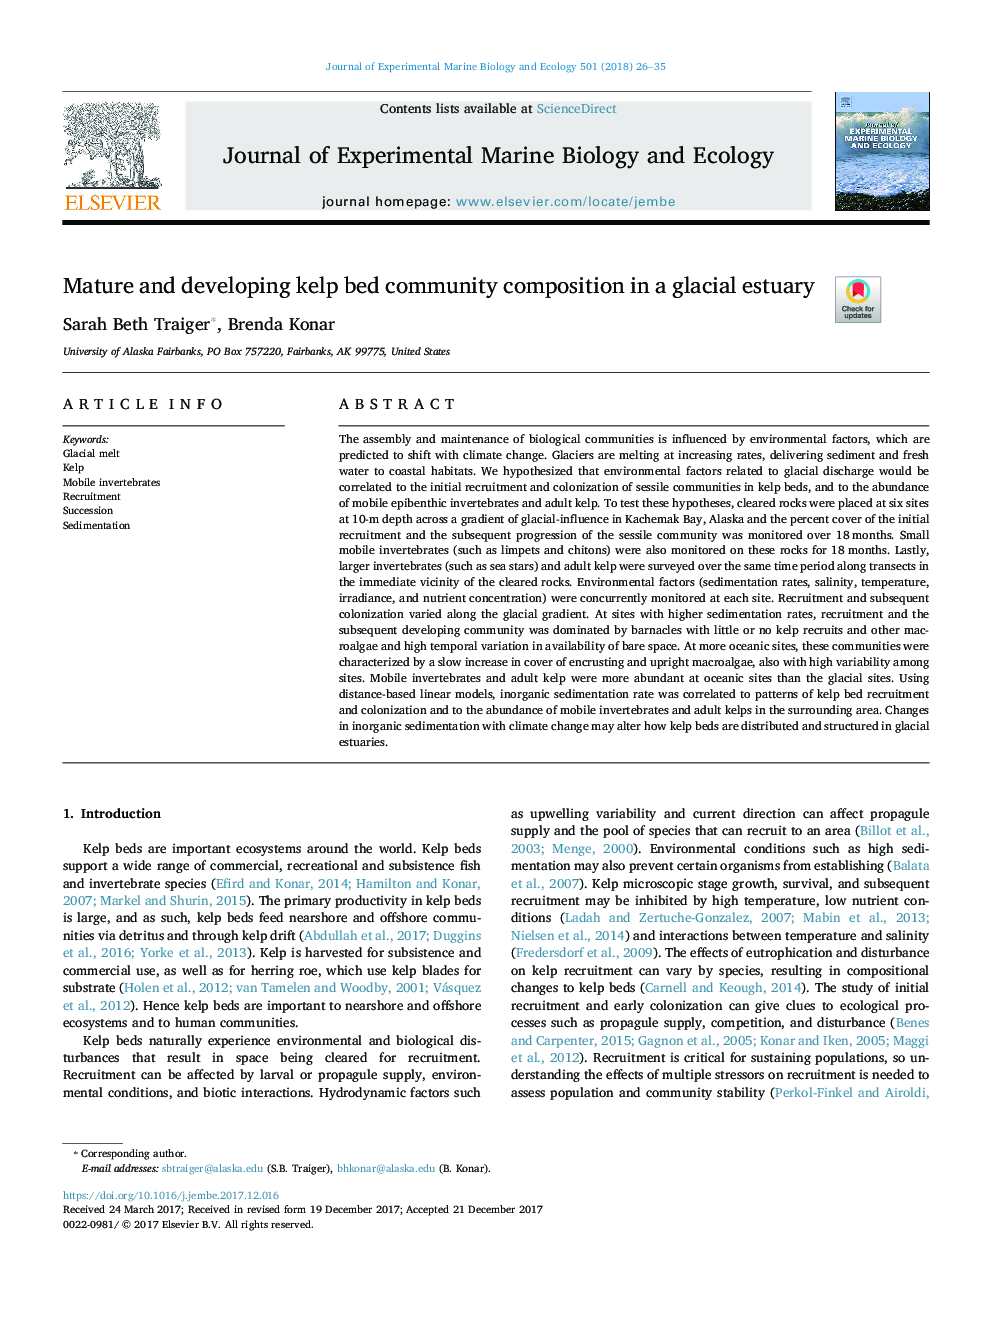 Mature and developing kelp bed community composition in a glacial estuary